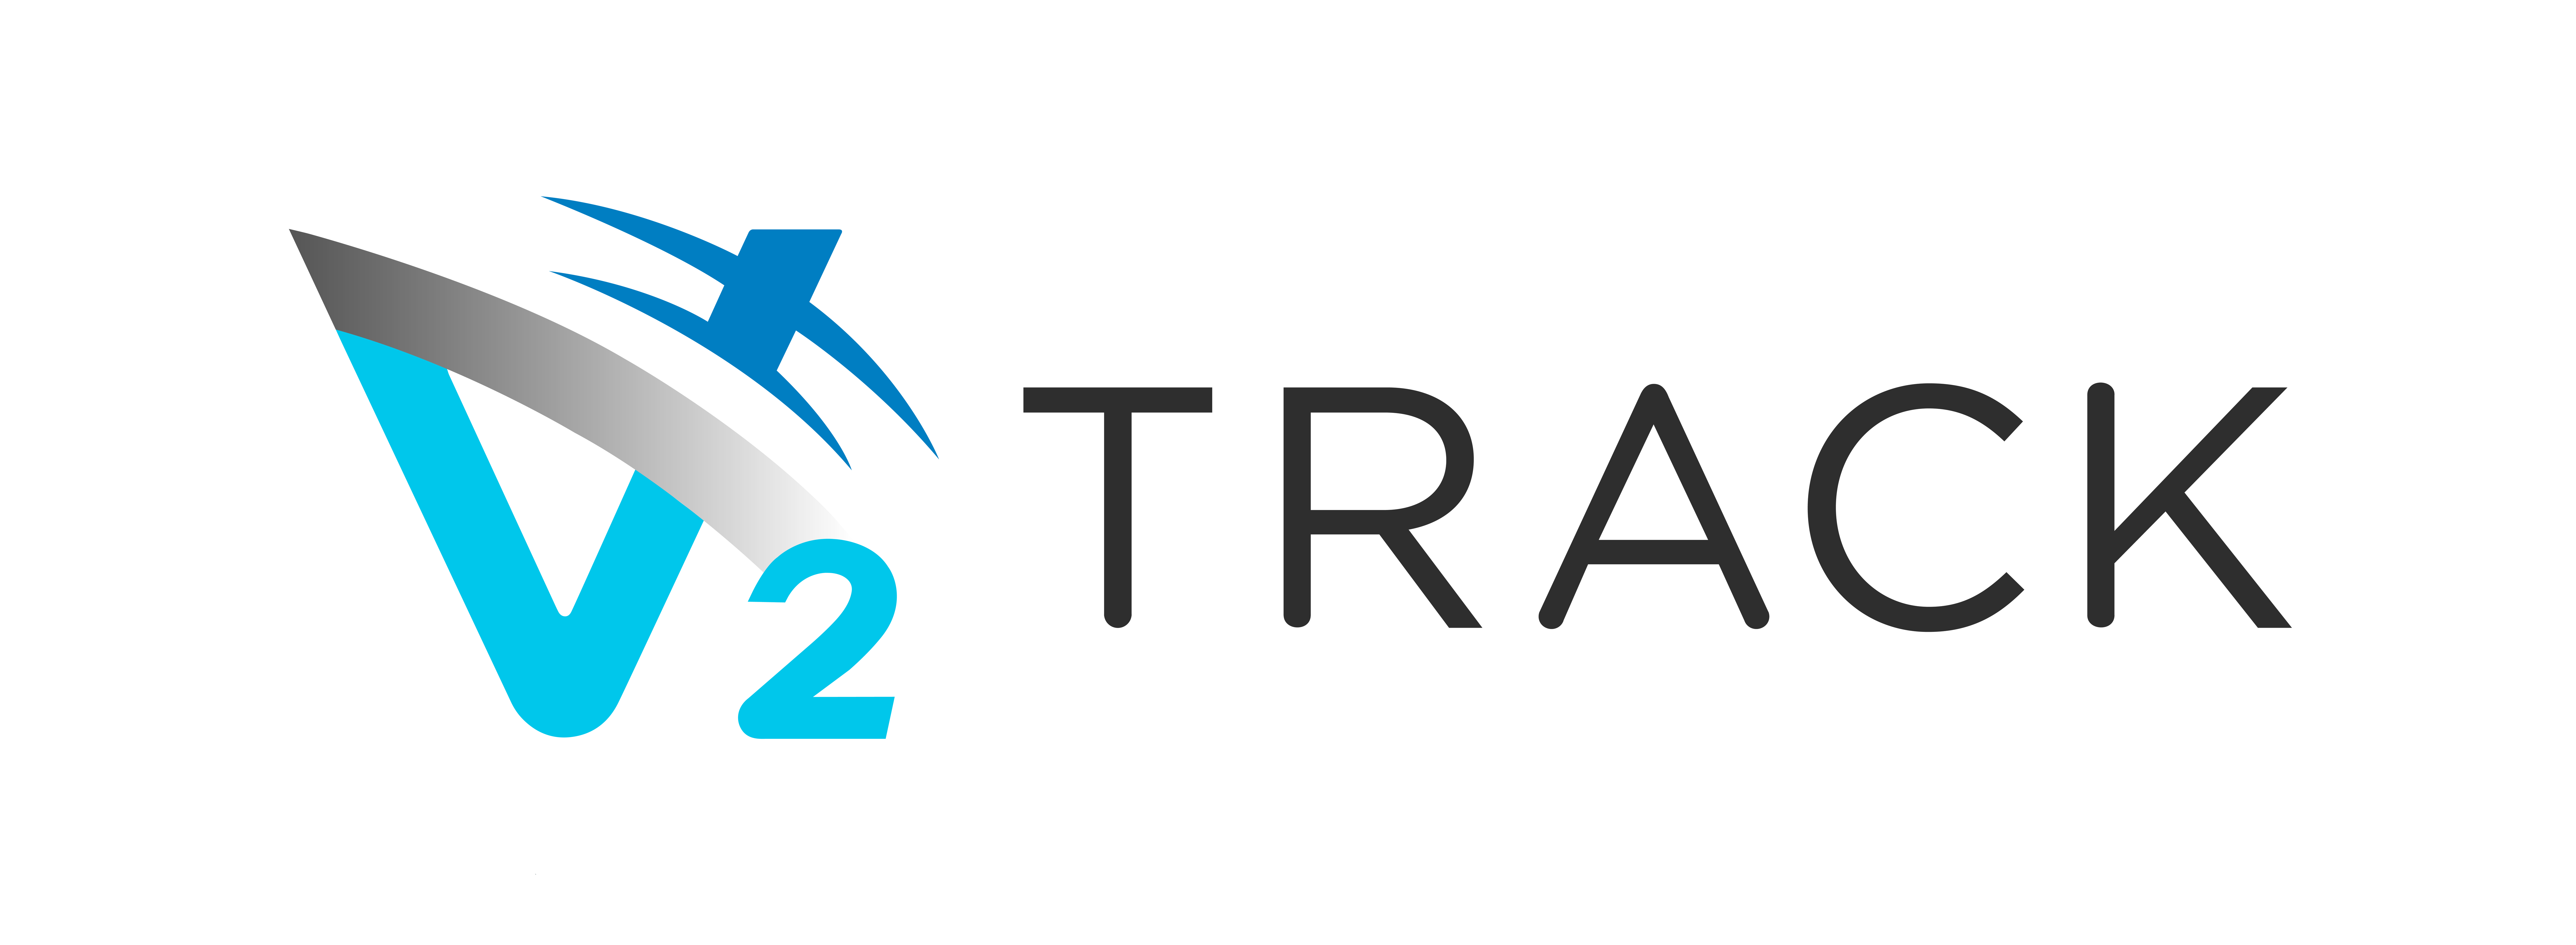 V2Track adapted logo concepts_Final